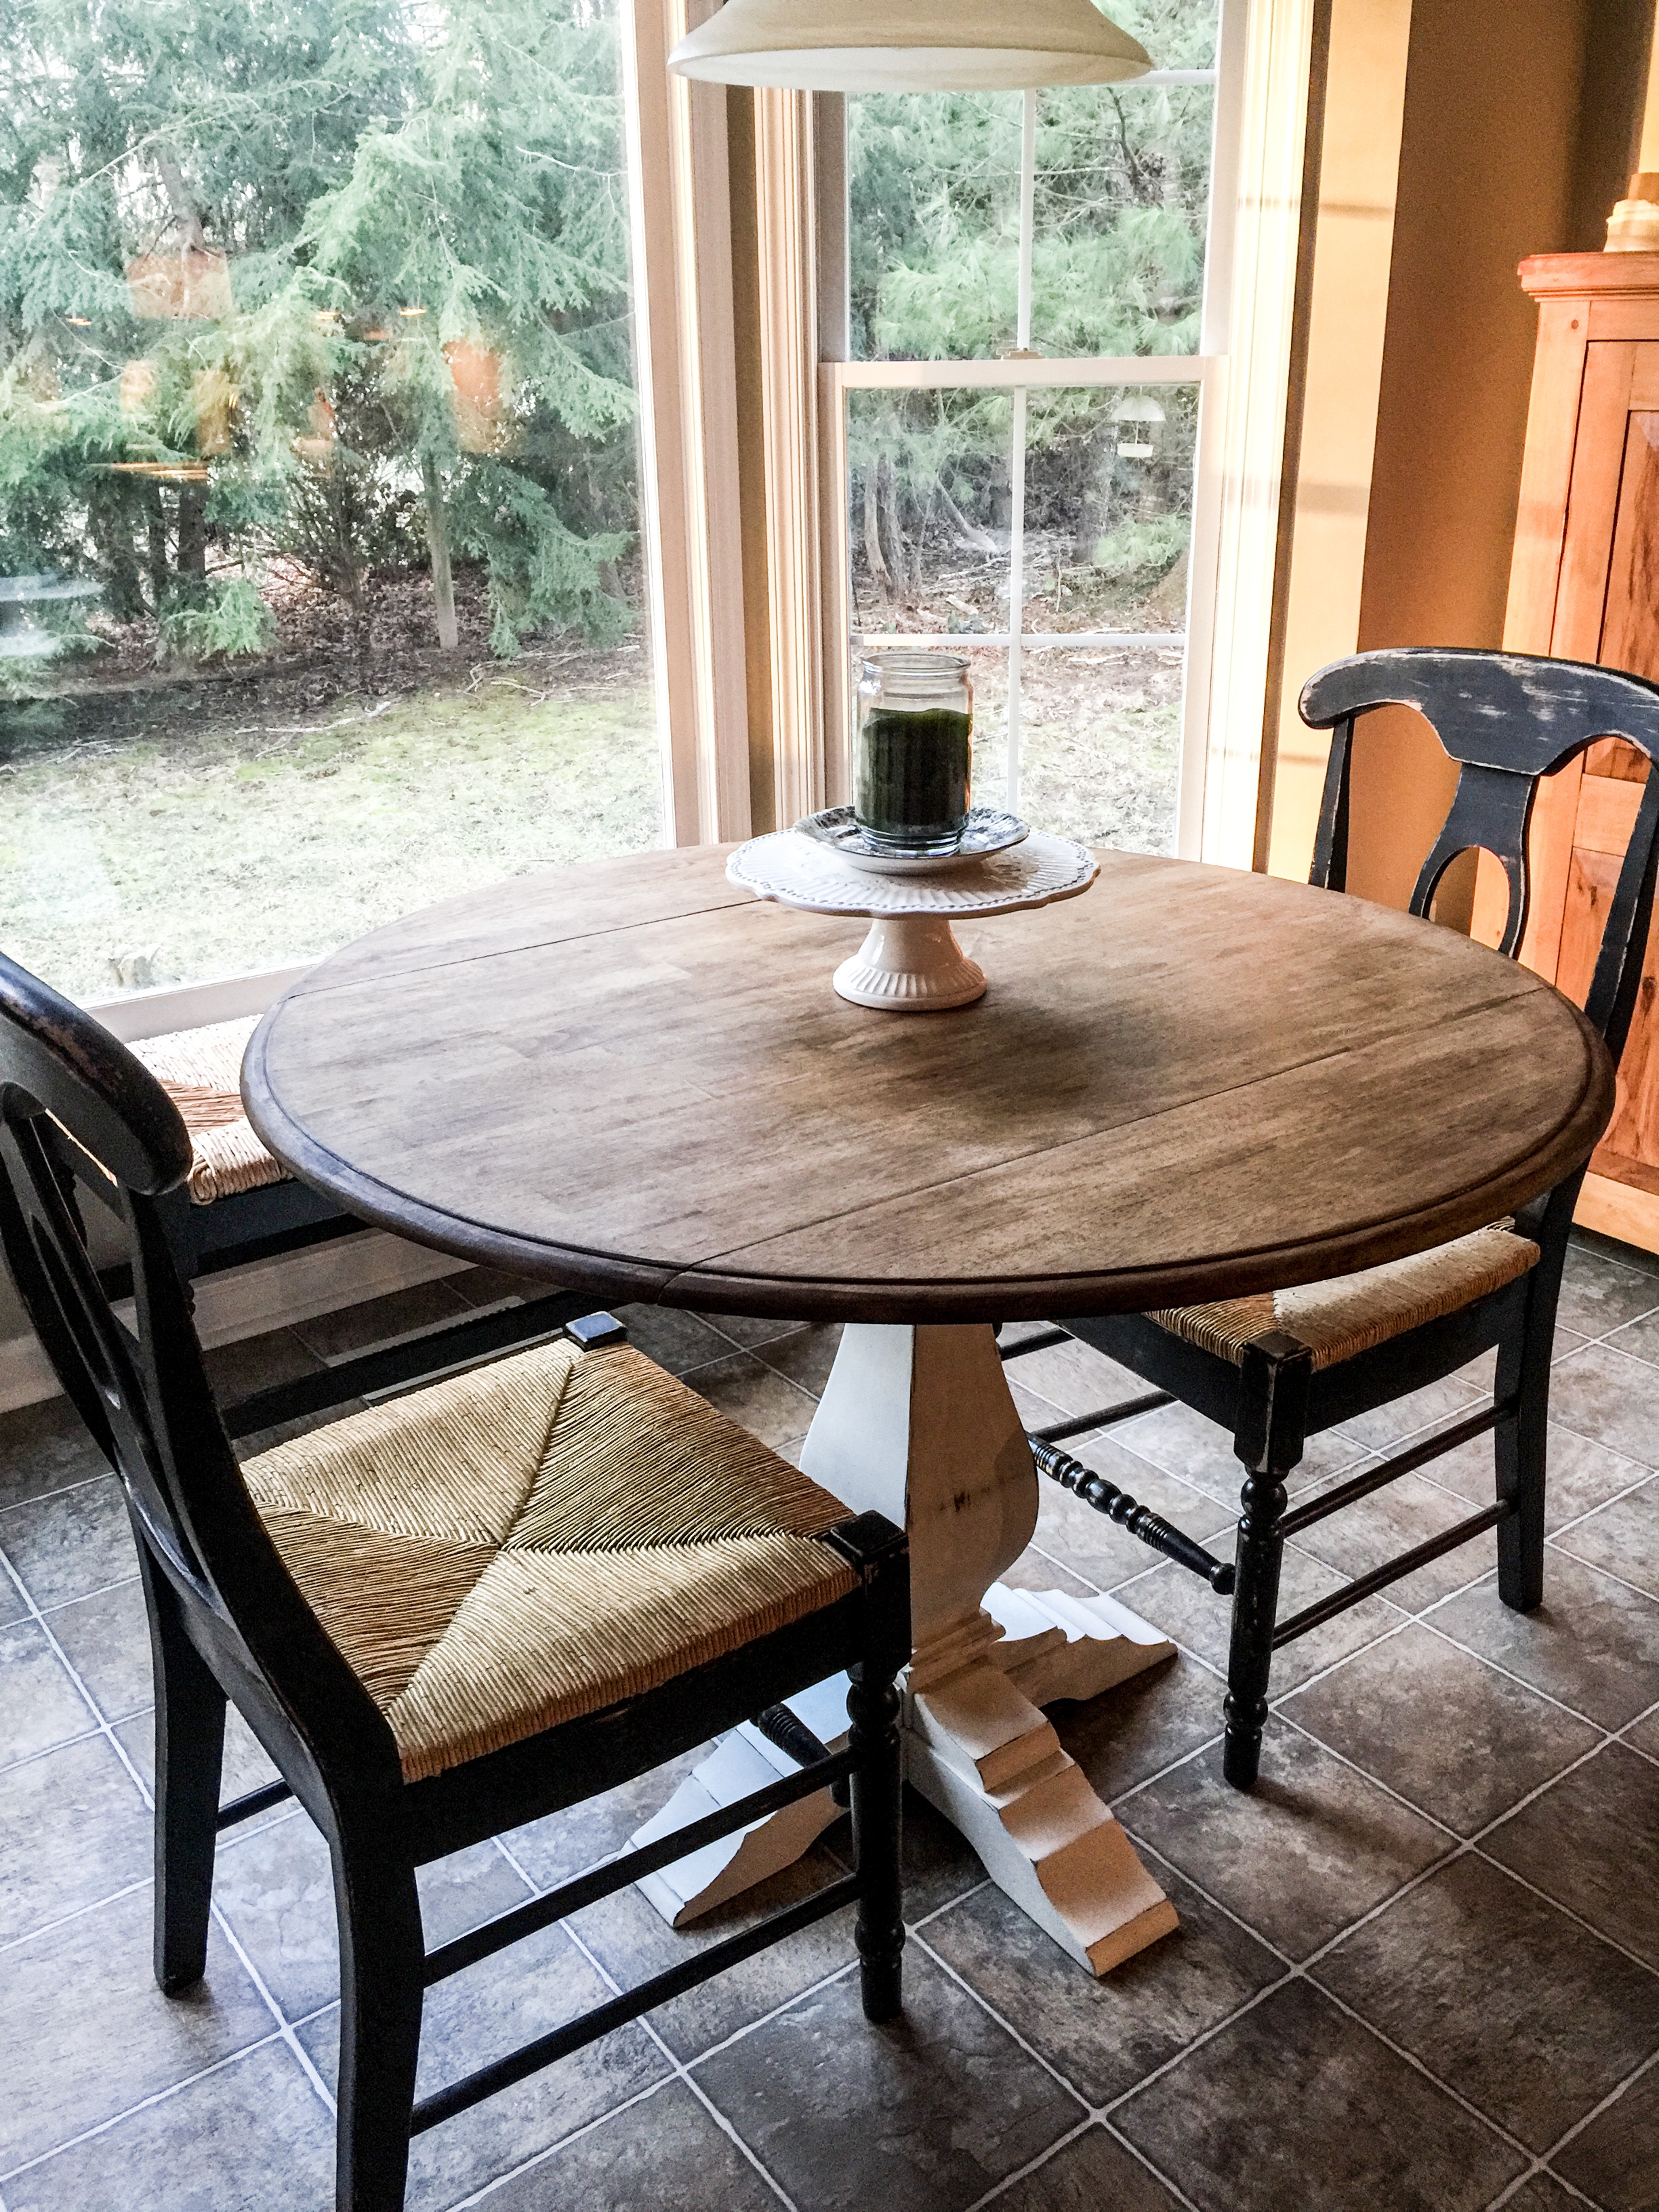 Our New Old Table